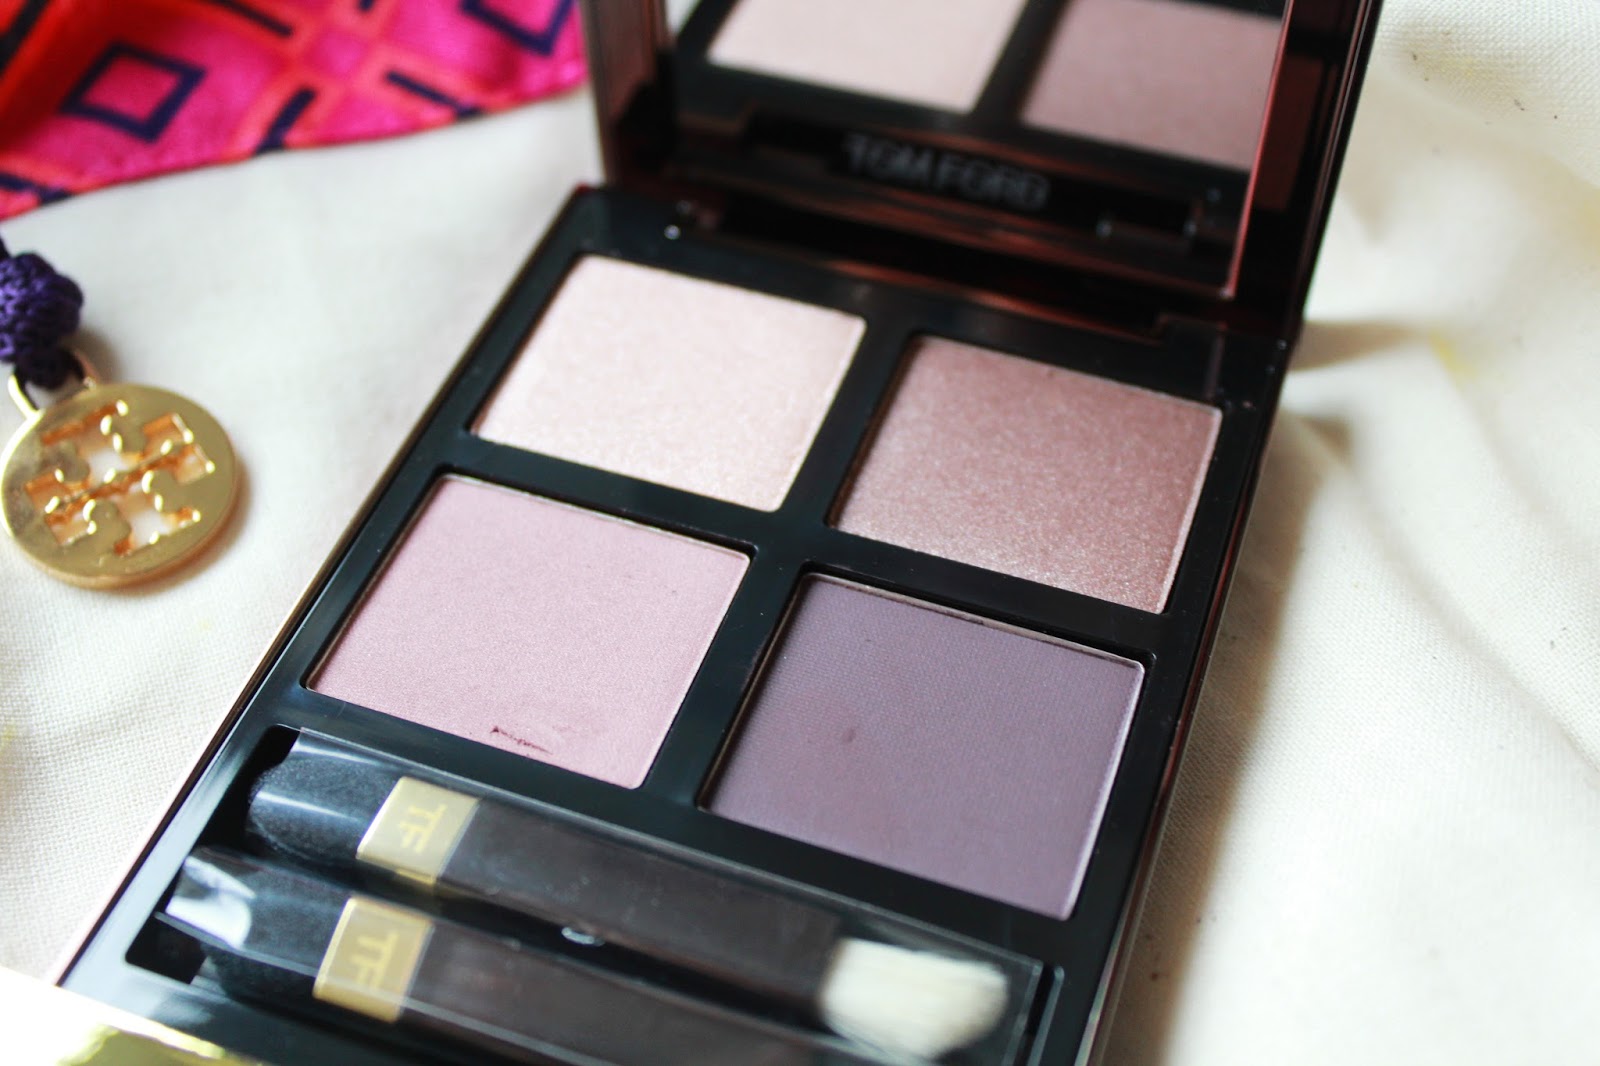 Tom Ford Eyeshadow Quad in Orchid Haze - Inthefrow